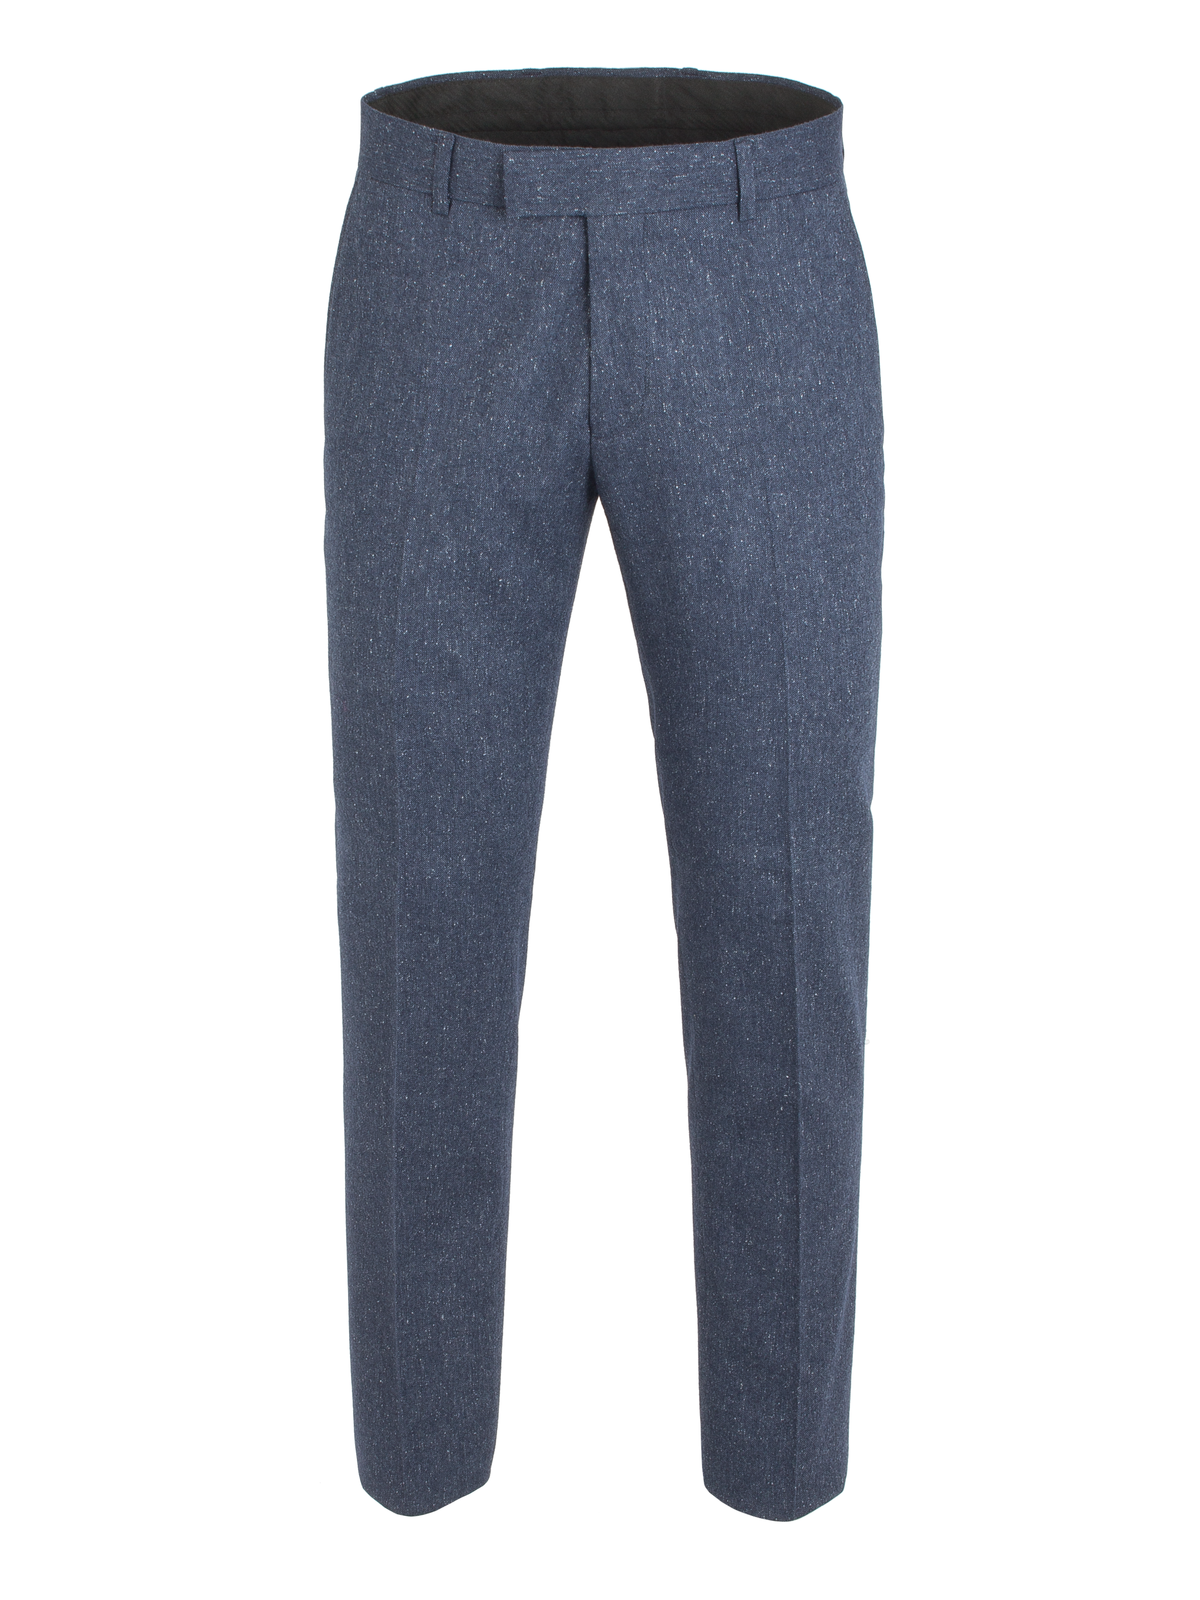 Modshoes Peaky Blinders Style Trousers Blue 01 – Mod Shoes